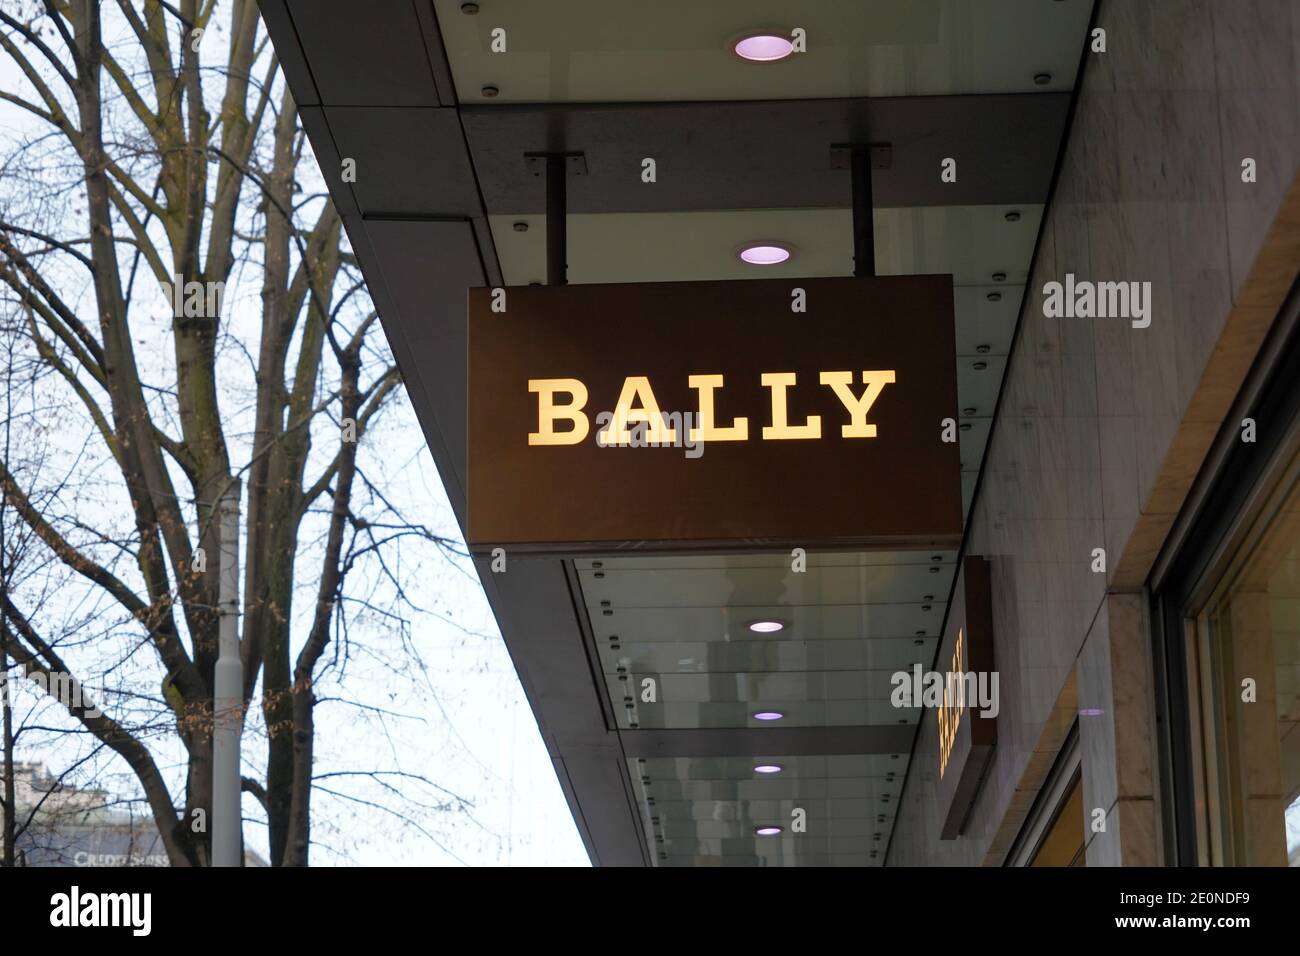 Bally High Resolution Stock Photography and Images - Alamy